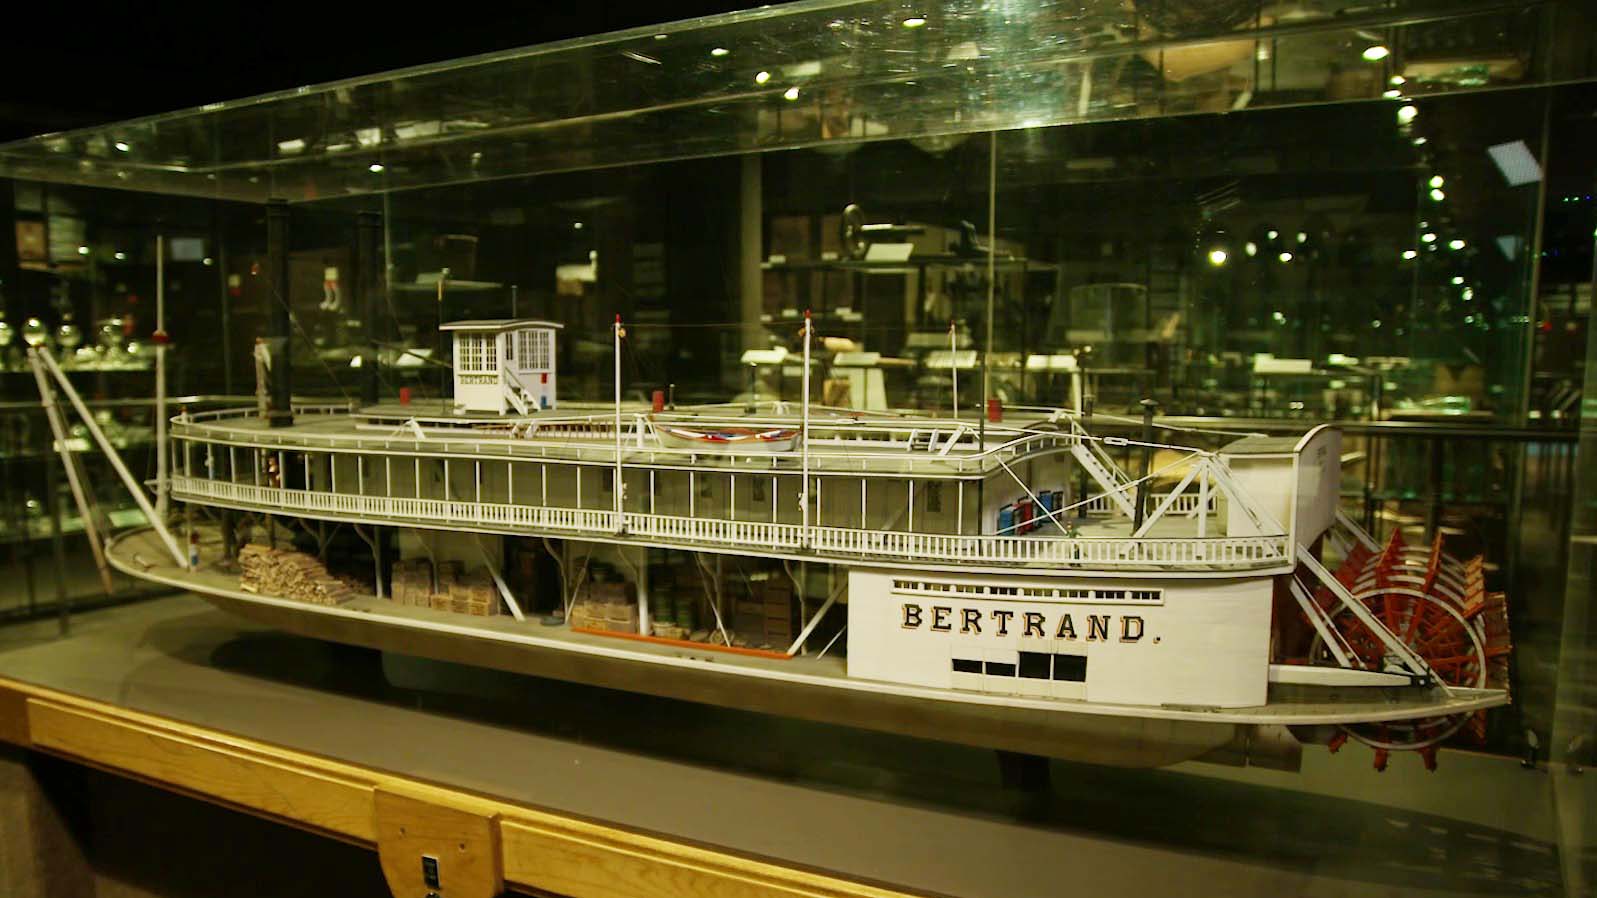 A model of the Steamboat Bertrand in a museum.